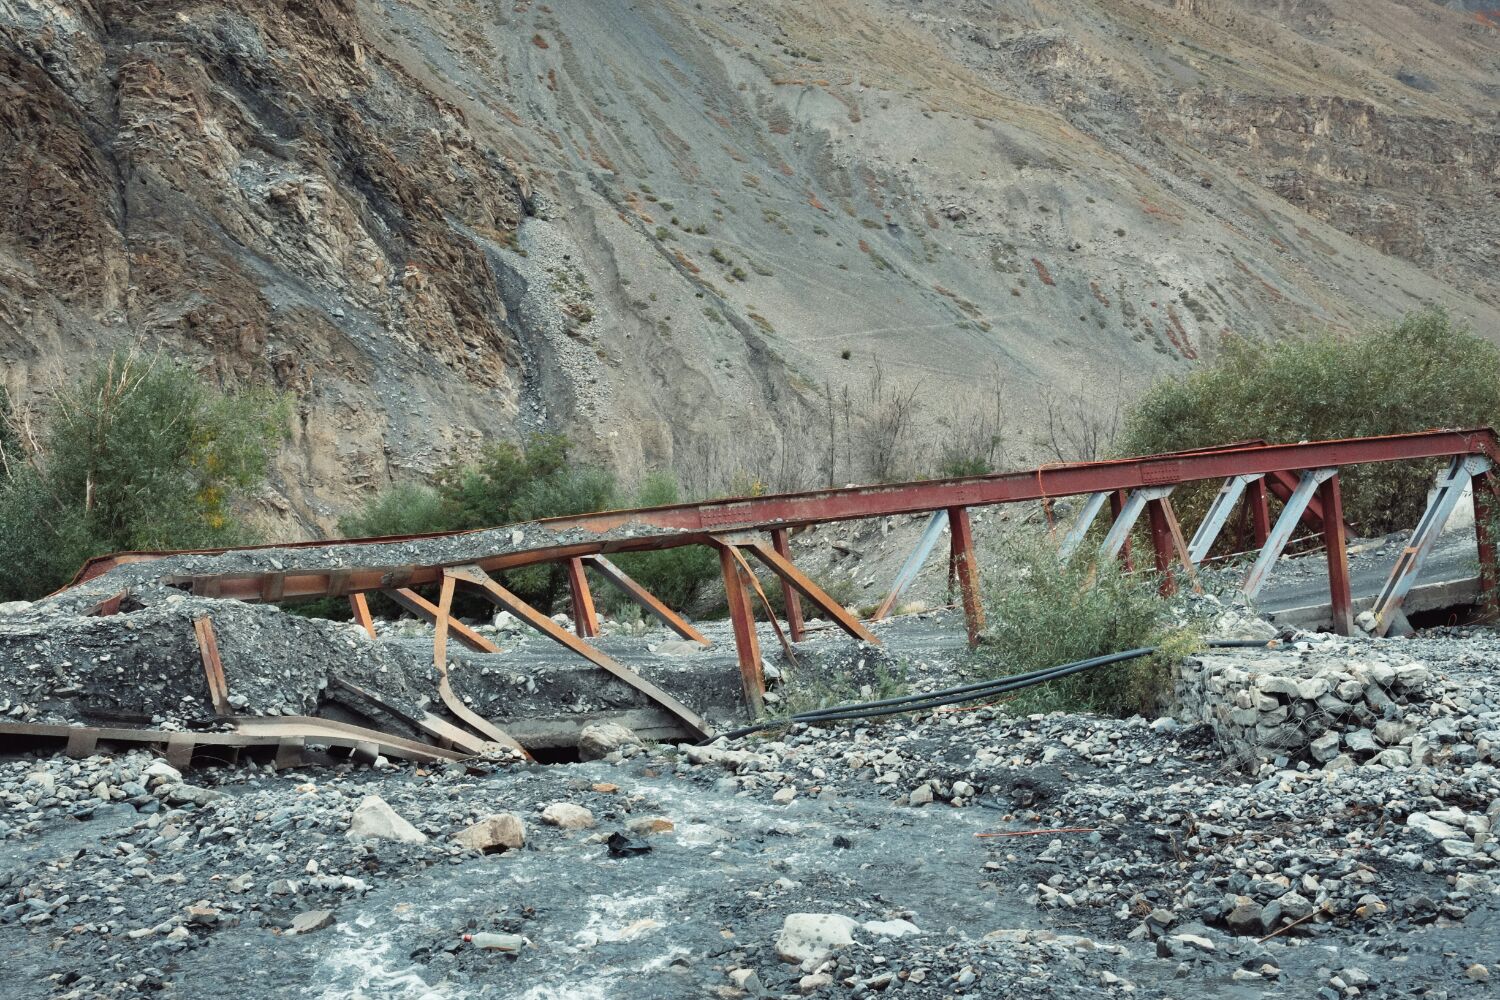 A common sight in the Spiti Valley